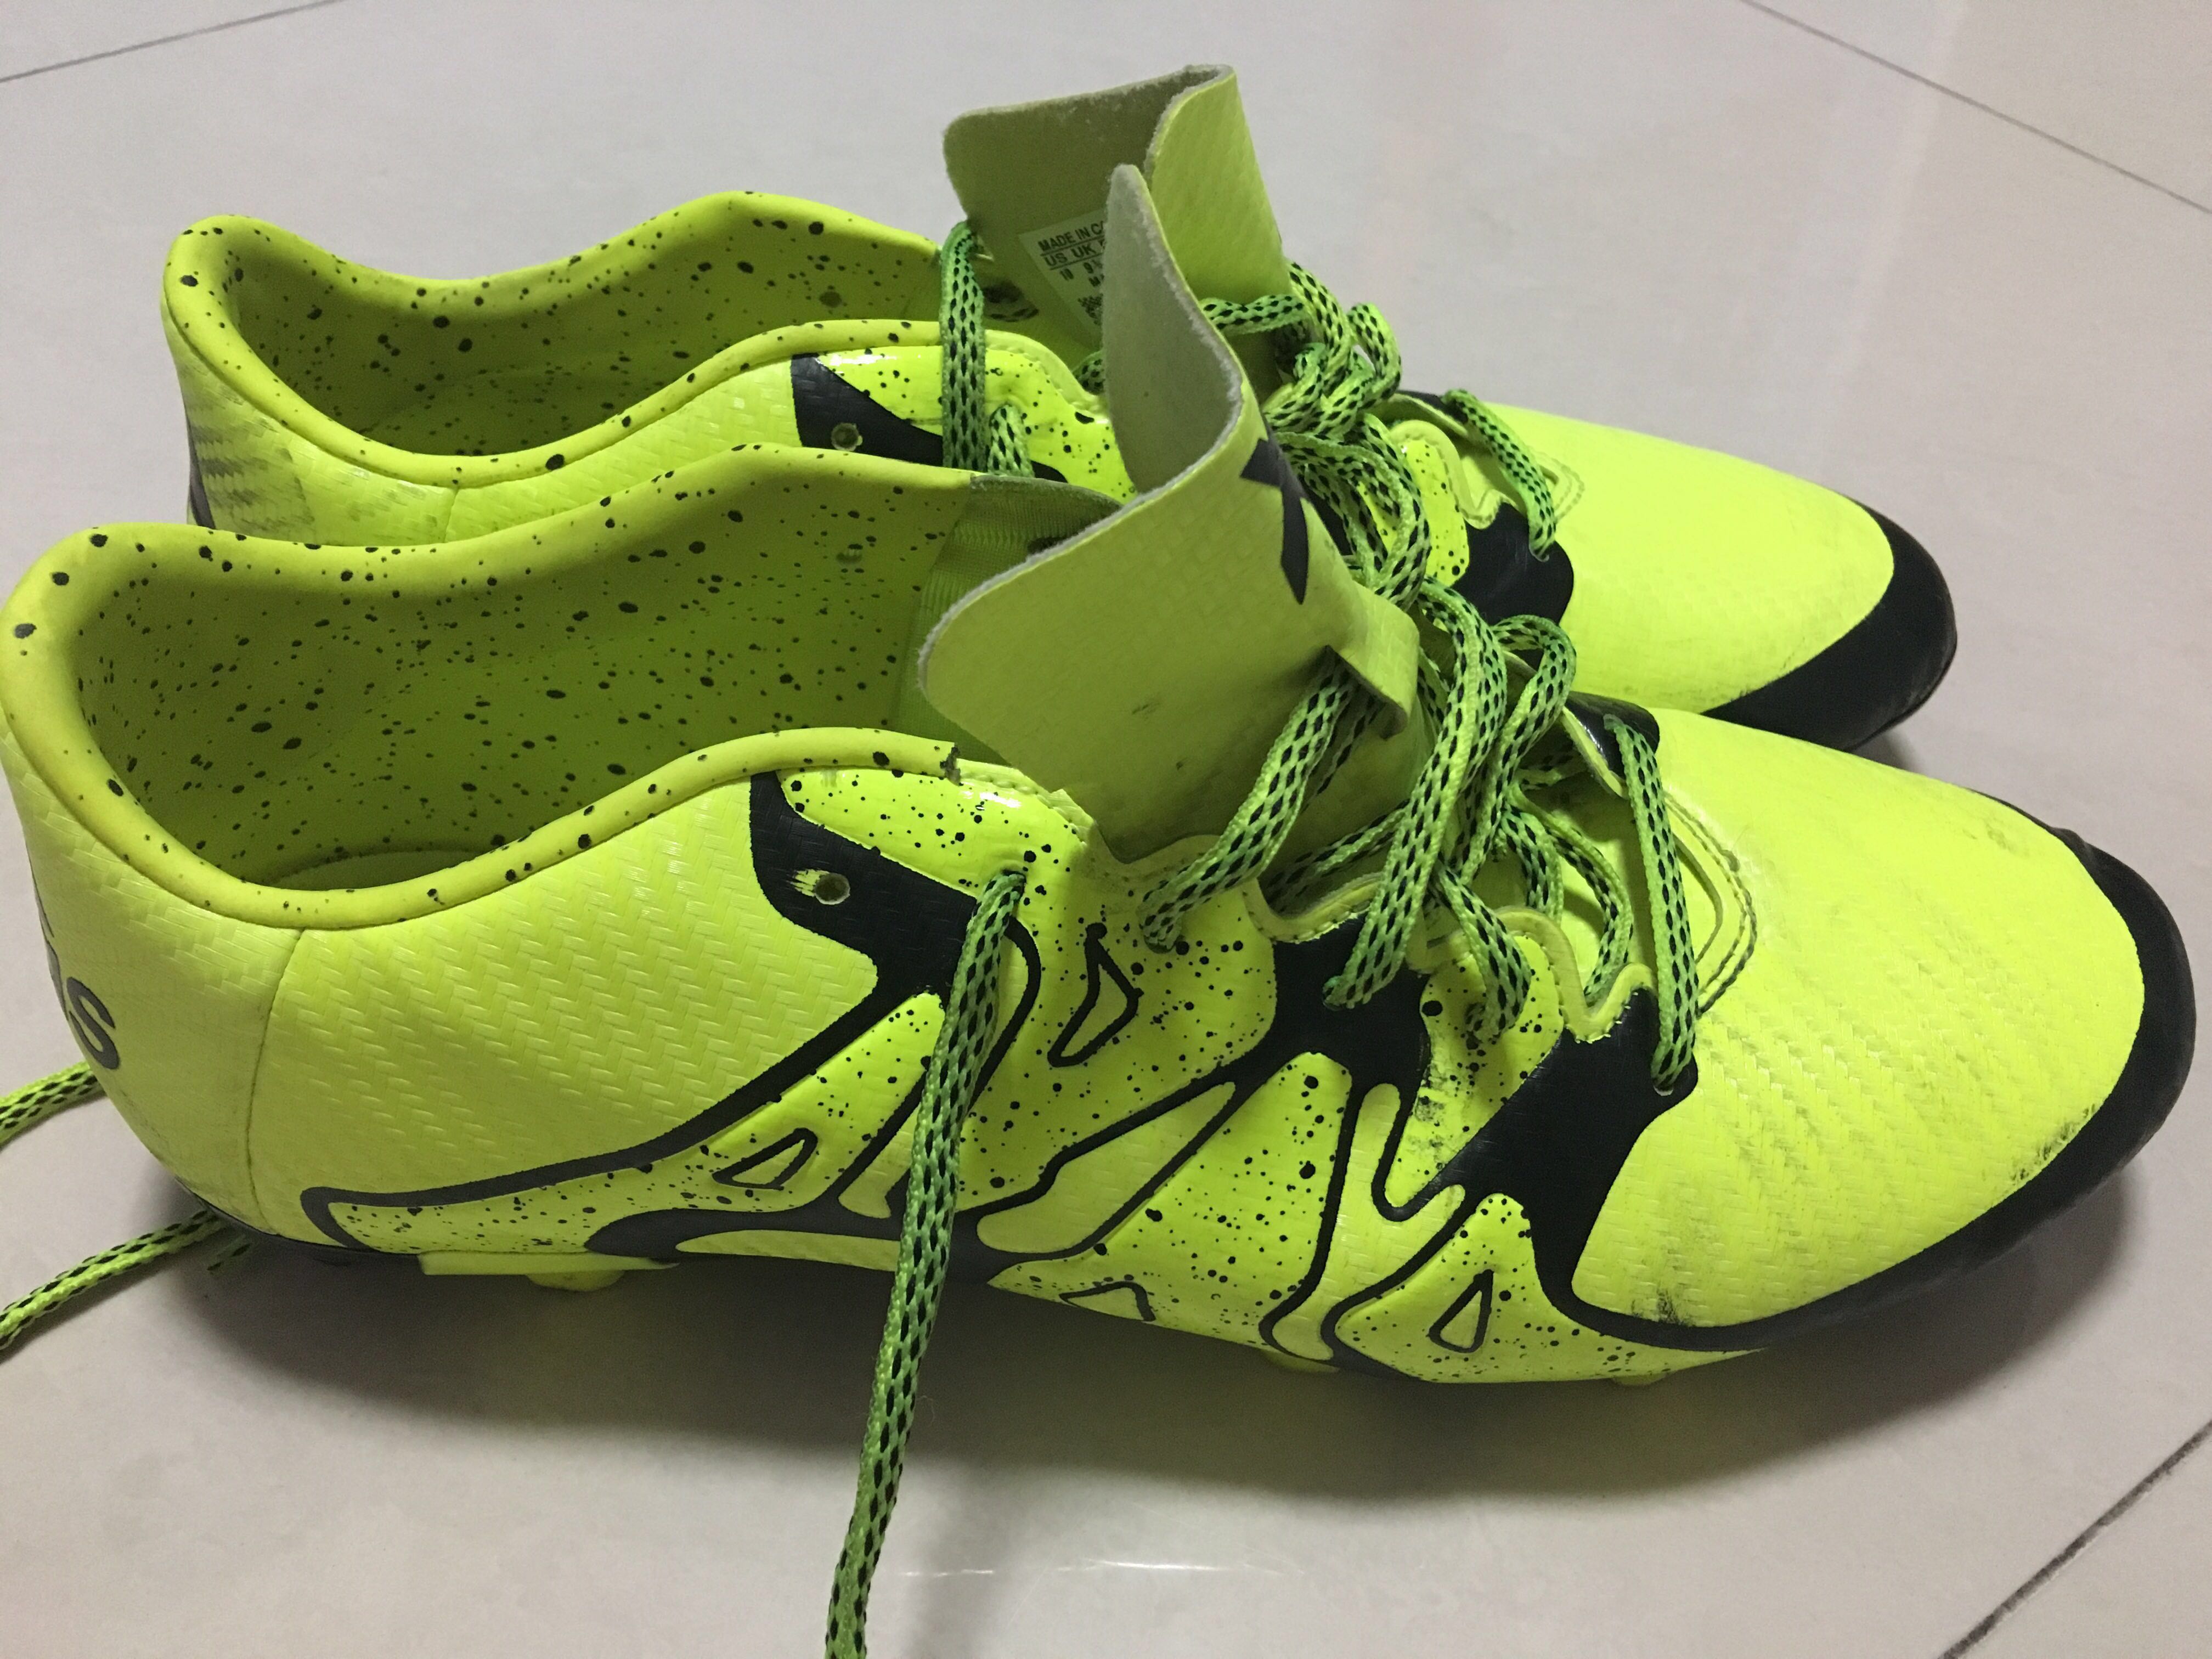 Kakadu Coche Empresario Adidas Soccer Boots F15.3 (Green color) US size 10 UK size 9.5, Women's  Fashion, Footwear, Sneakers on Carousell